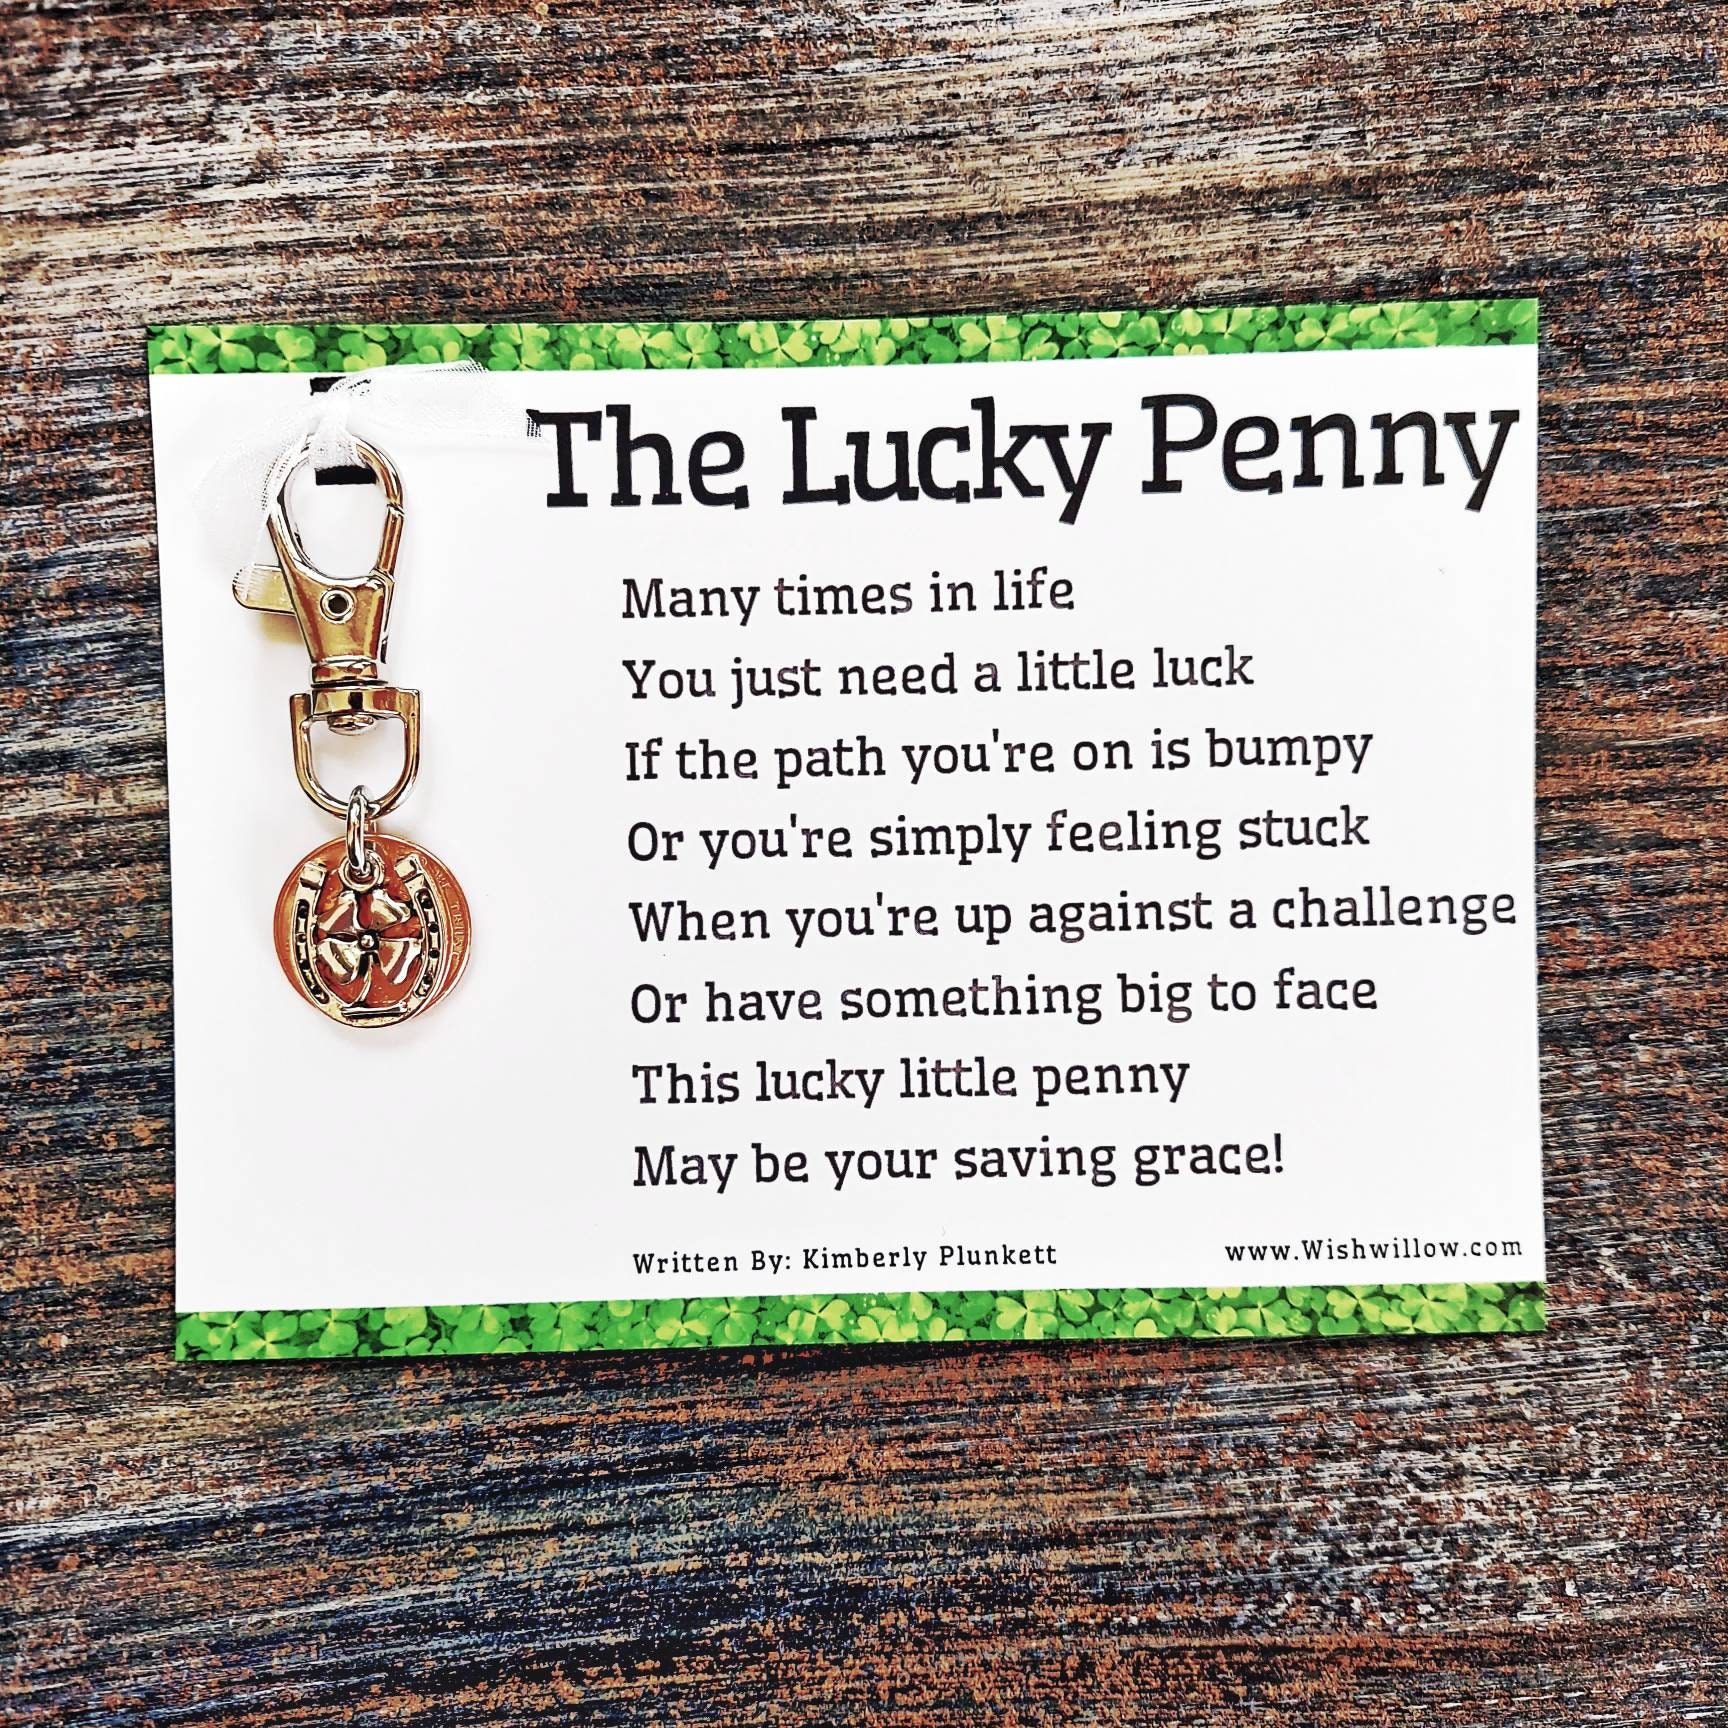 Printable Lucky Penny Poem I Pulled A Little Harder But It Wasn’t Any Use.